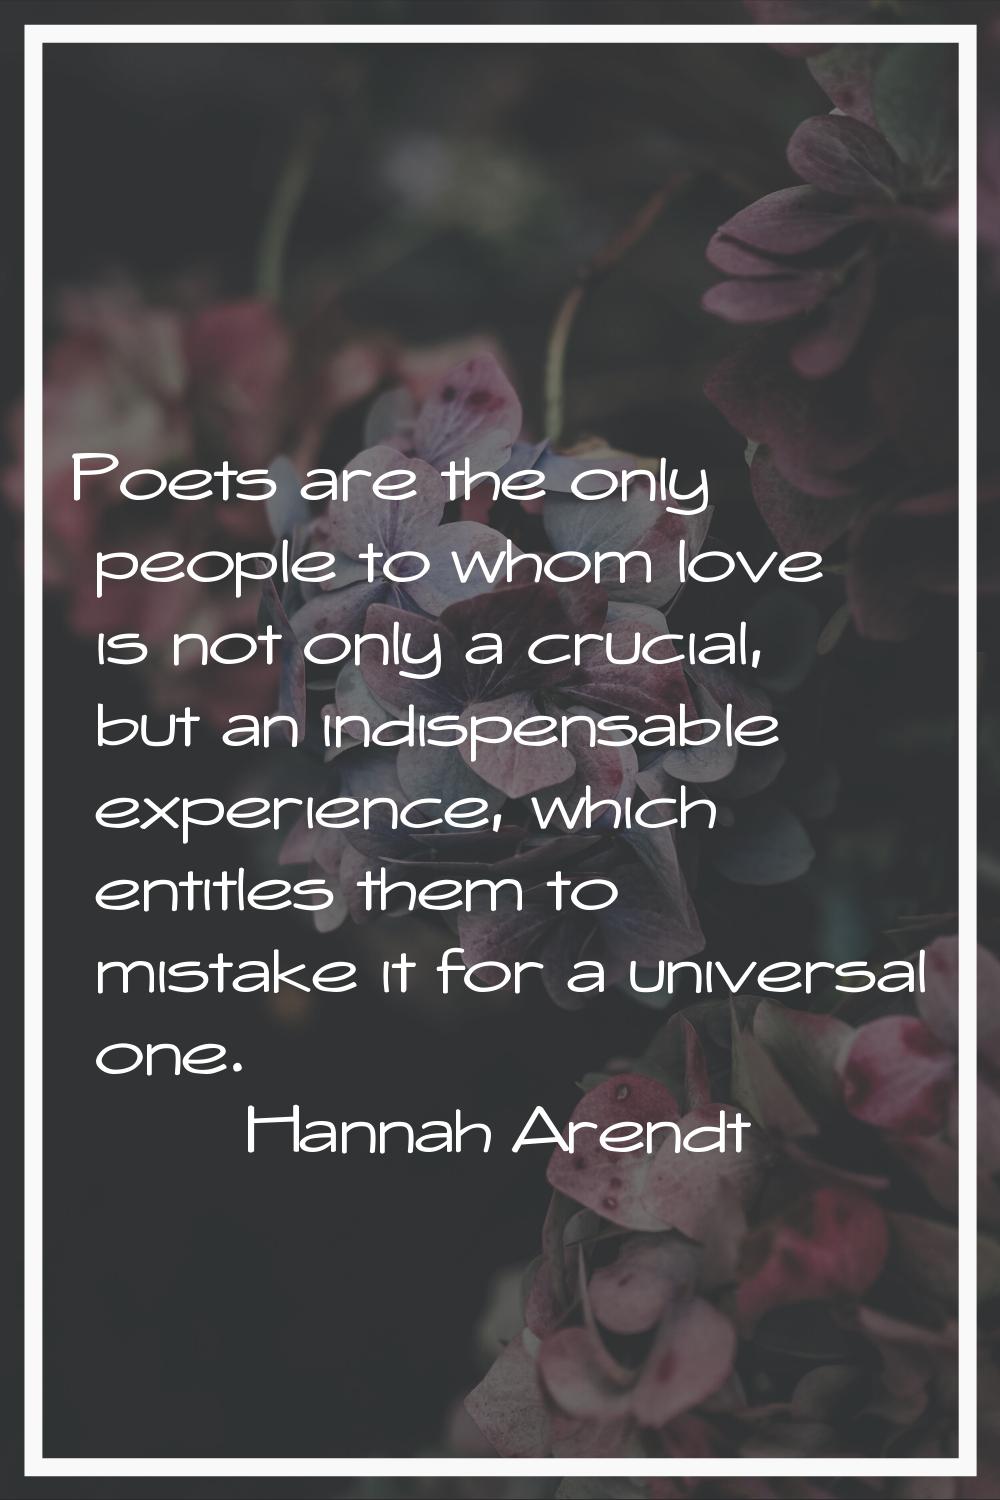 Poets are the only people to whom love is not only a crucial, but an indispensable experience, whic